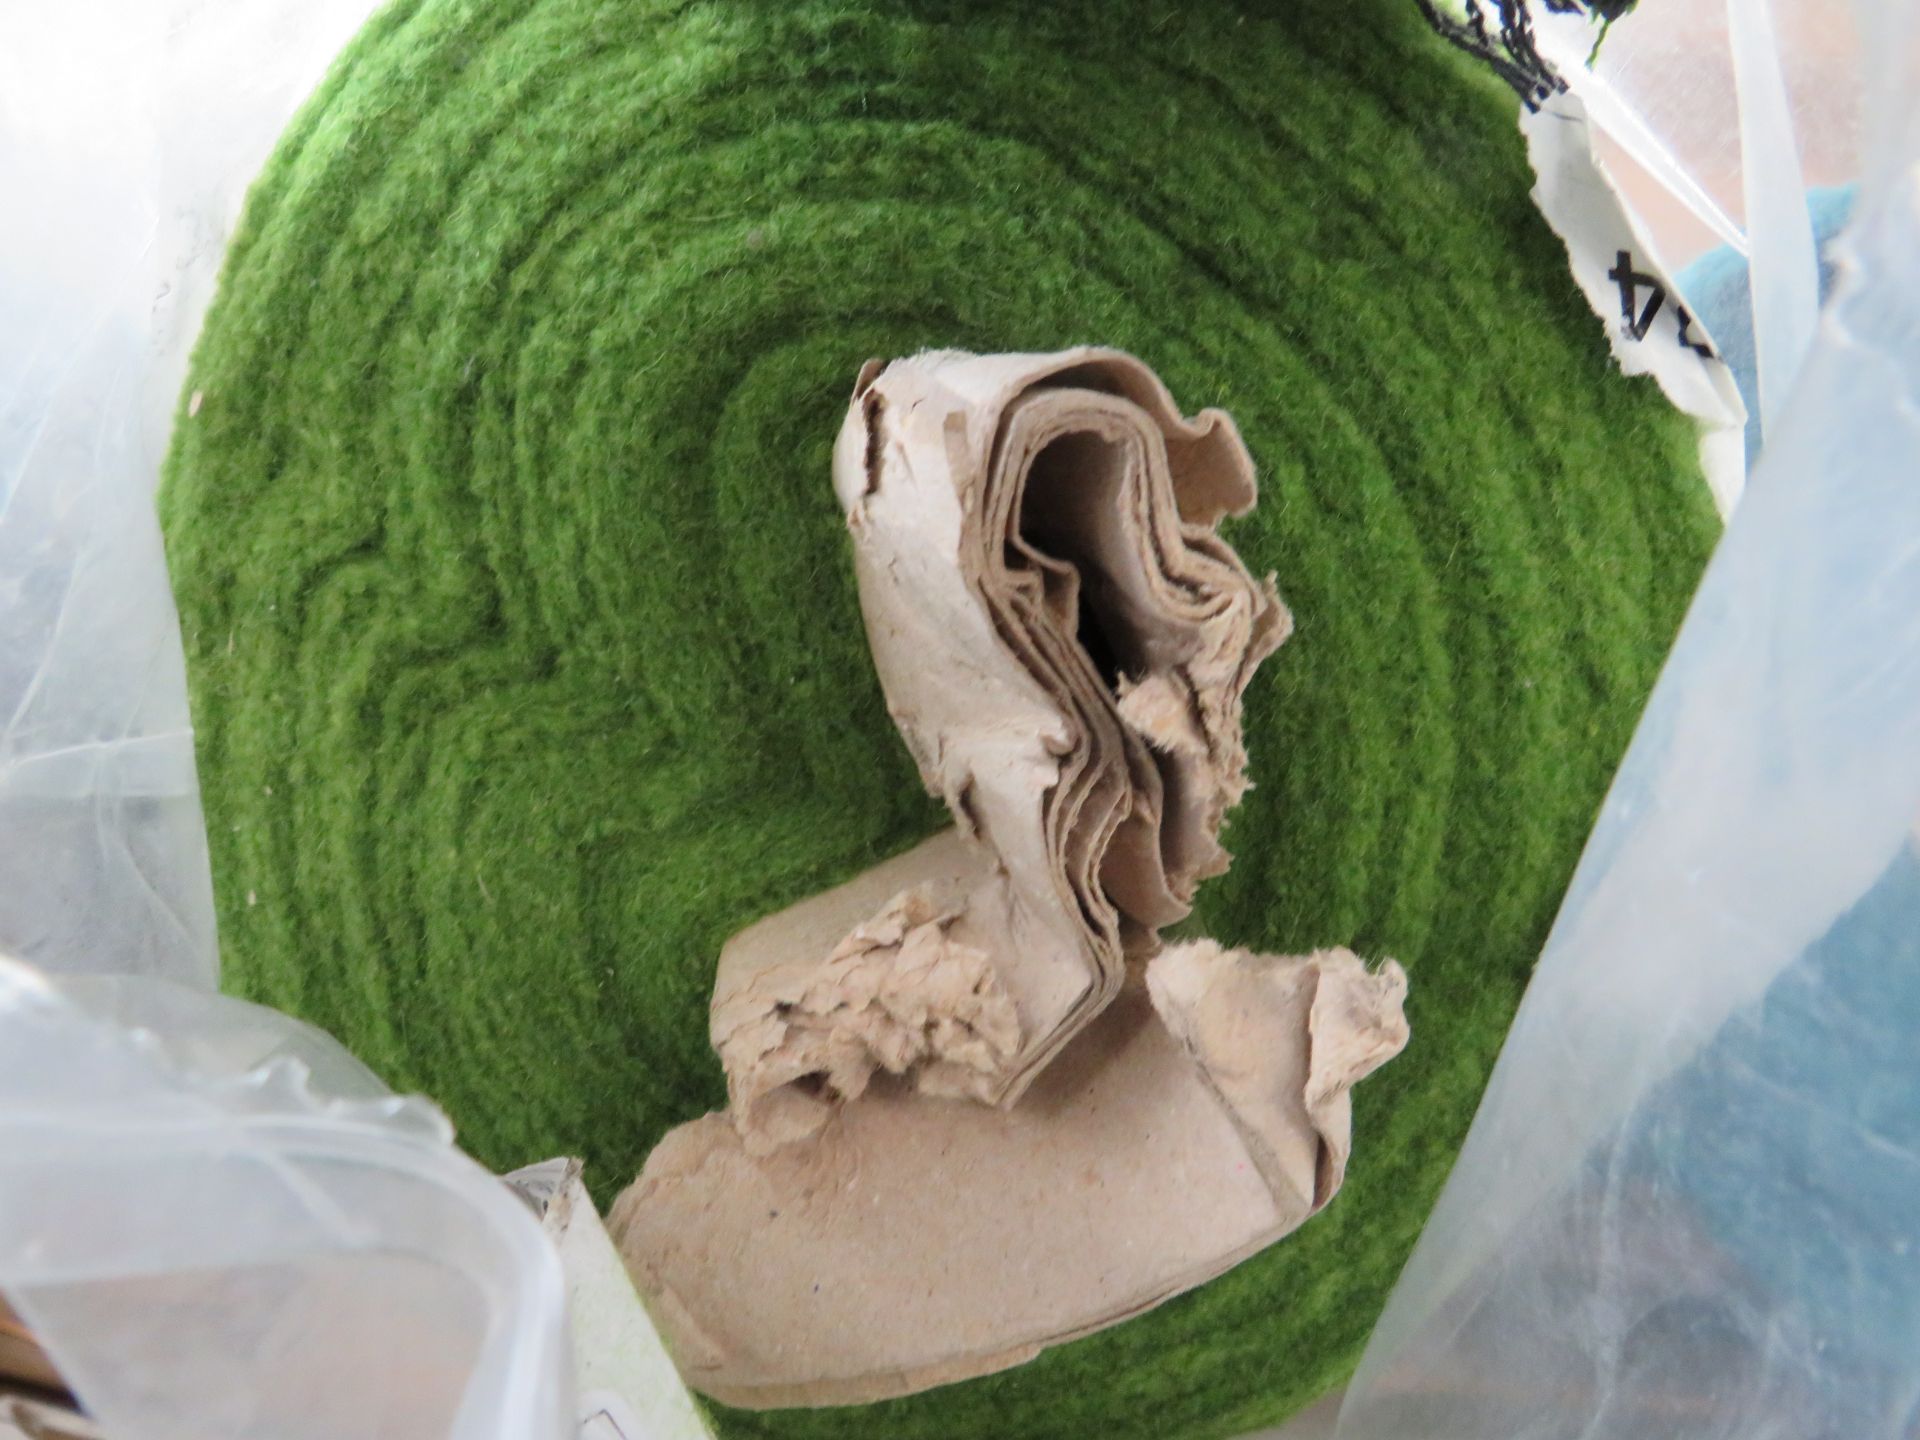 Roll of Mary Lamb Rosmarino green fabric, unknown length as sold in John Lewis